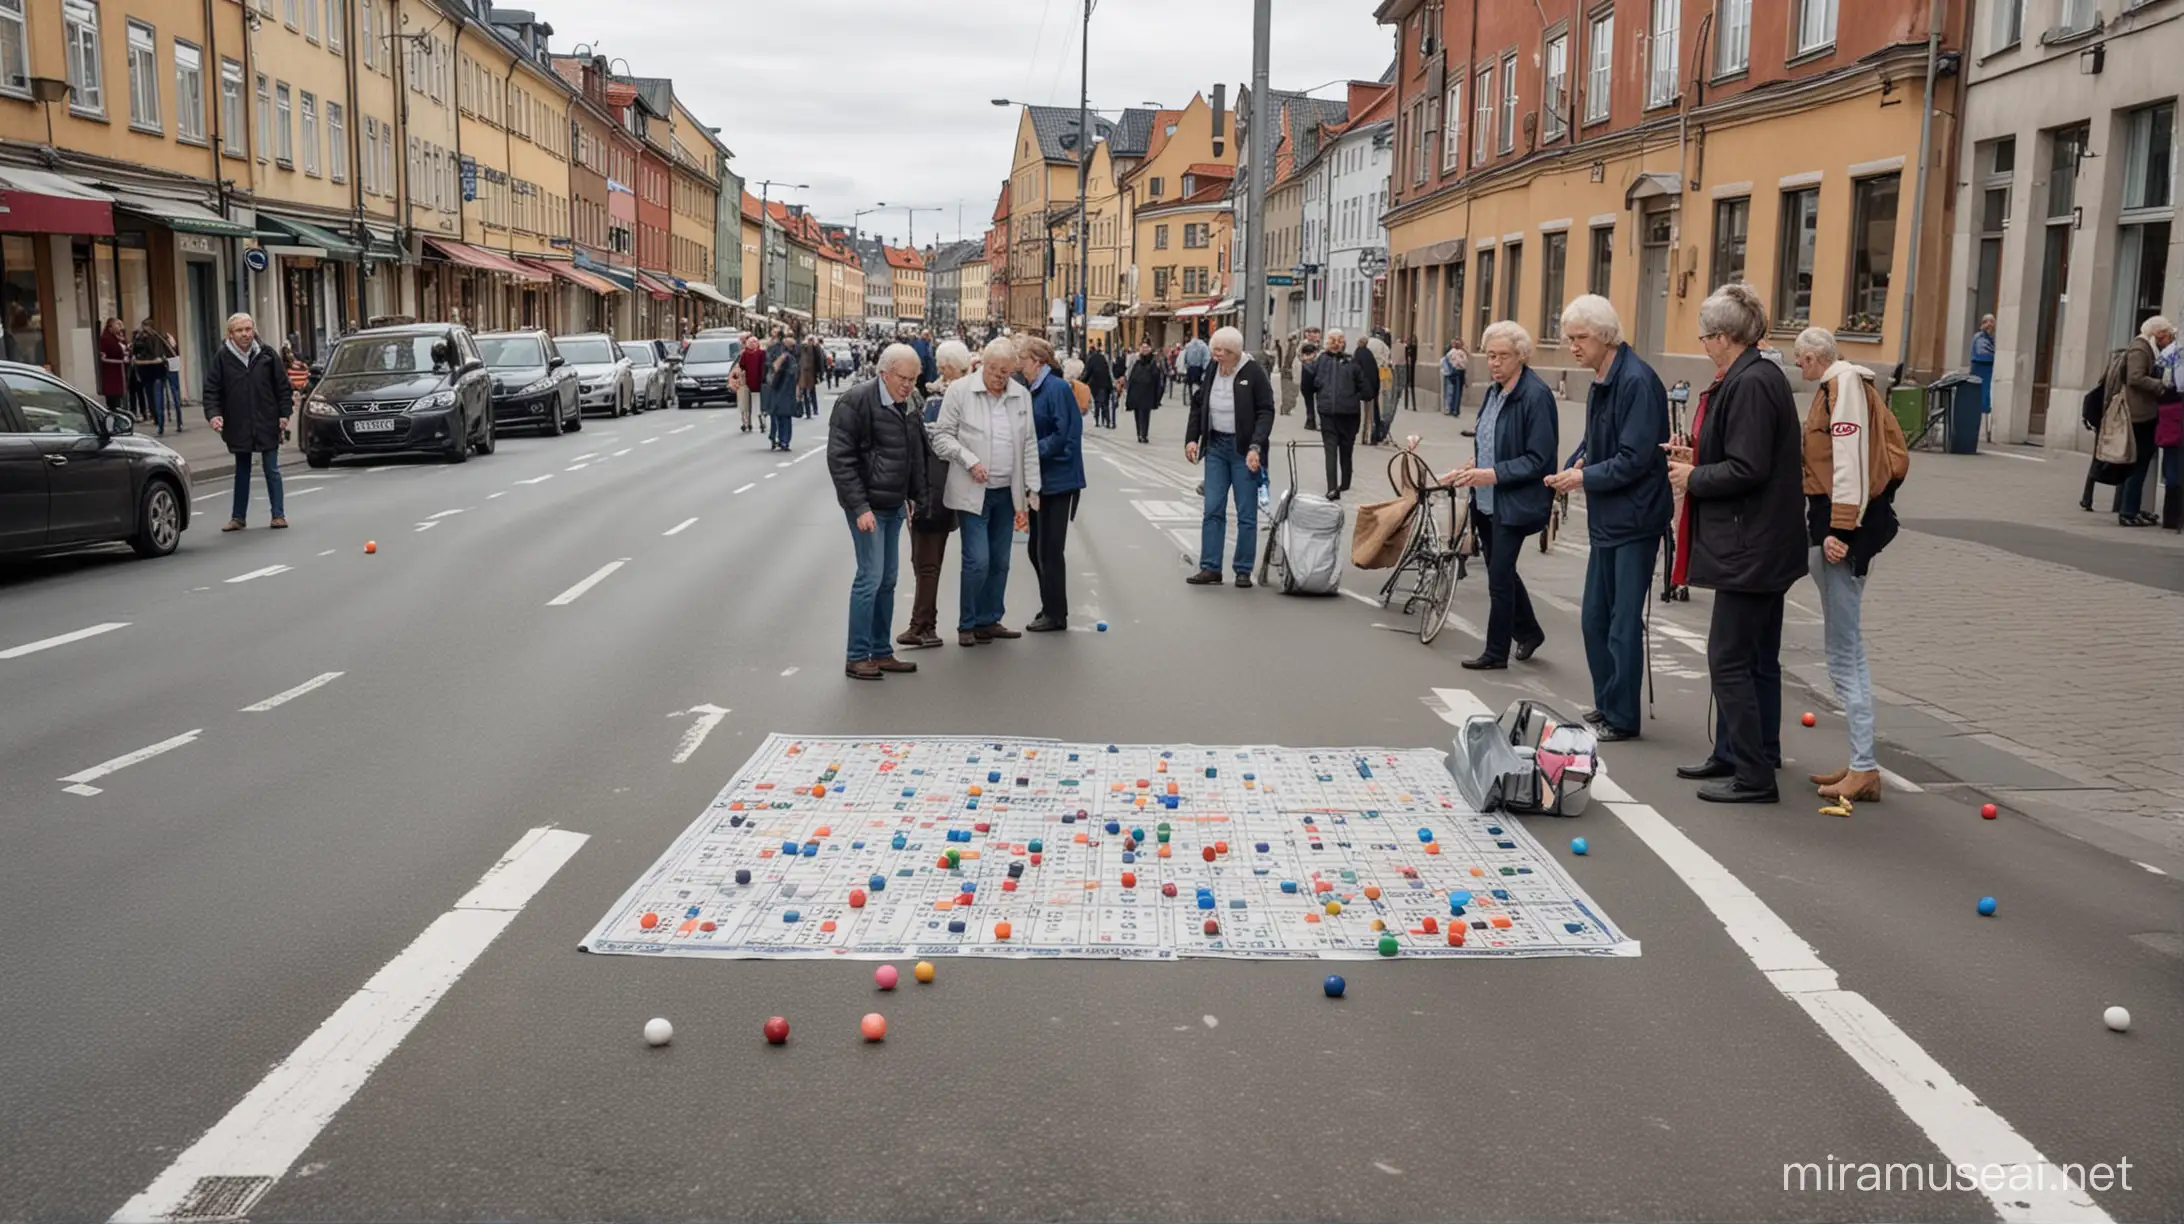 Seniors playing bingo in the middle of a street in Sweden, obstructing traffic.
